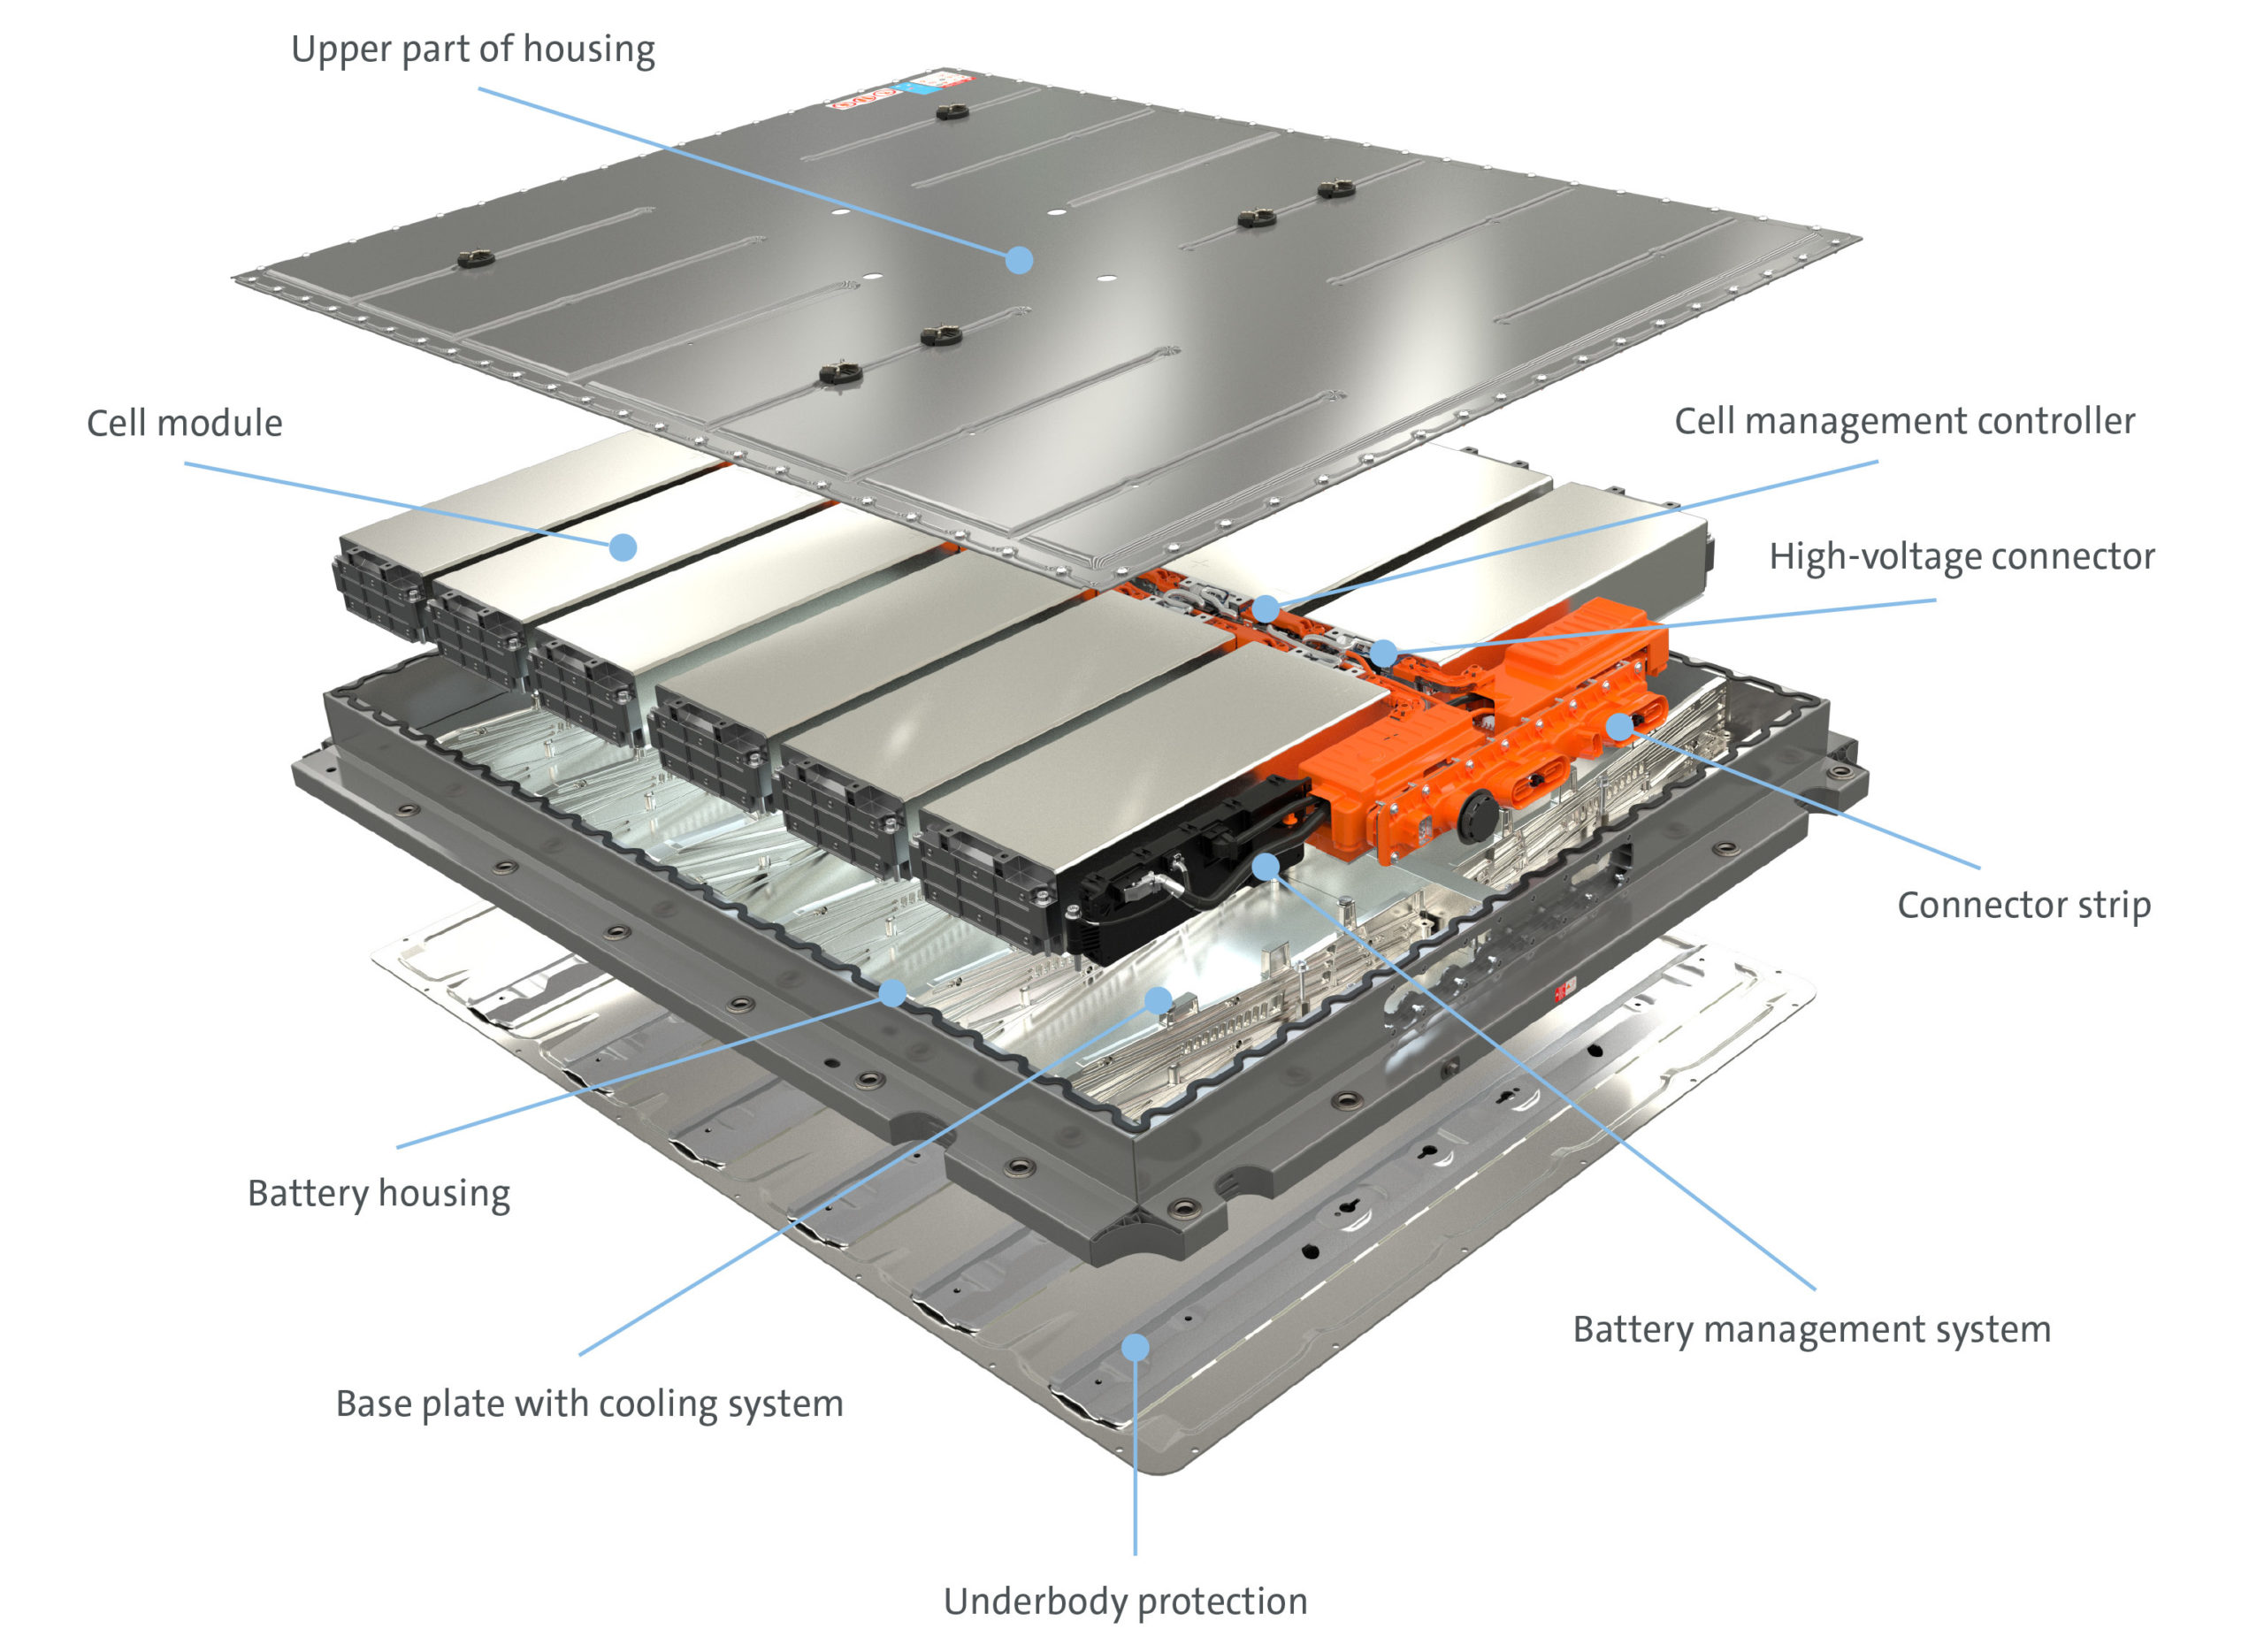 battery, electric cars, lithium-ion, materials, rare earth, sustainability, what goes into an electric vehicle battery, where do the materials come from and are they produced ethically?